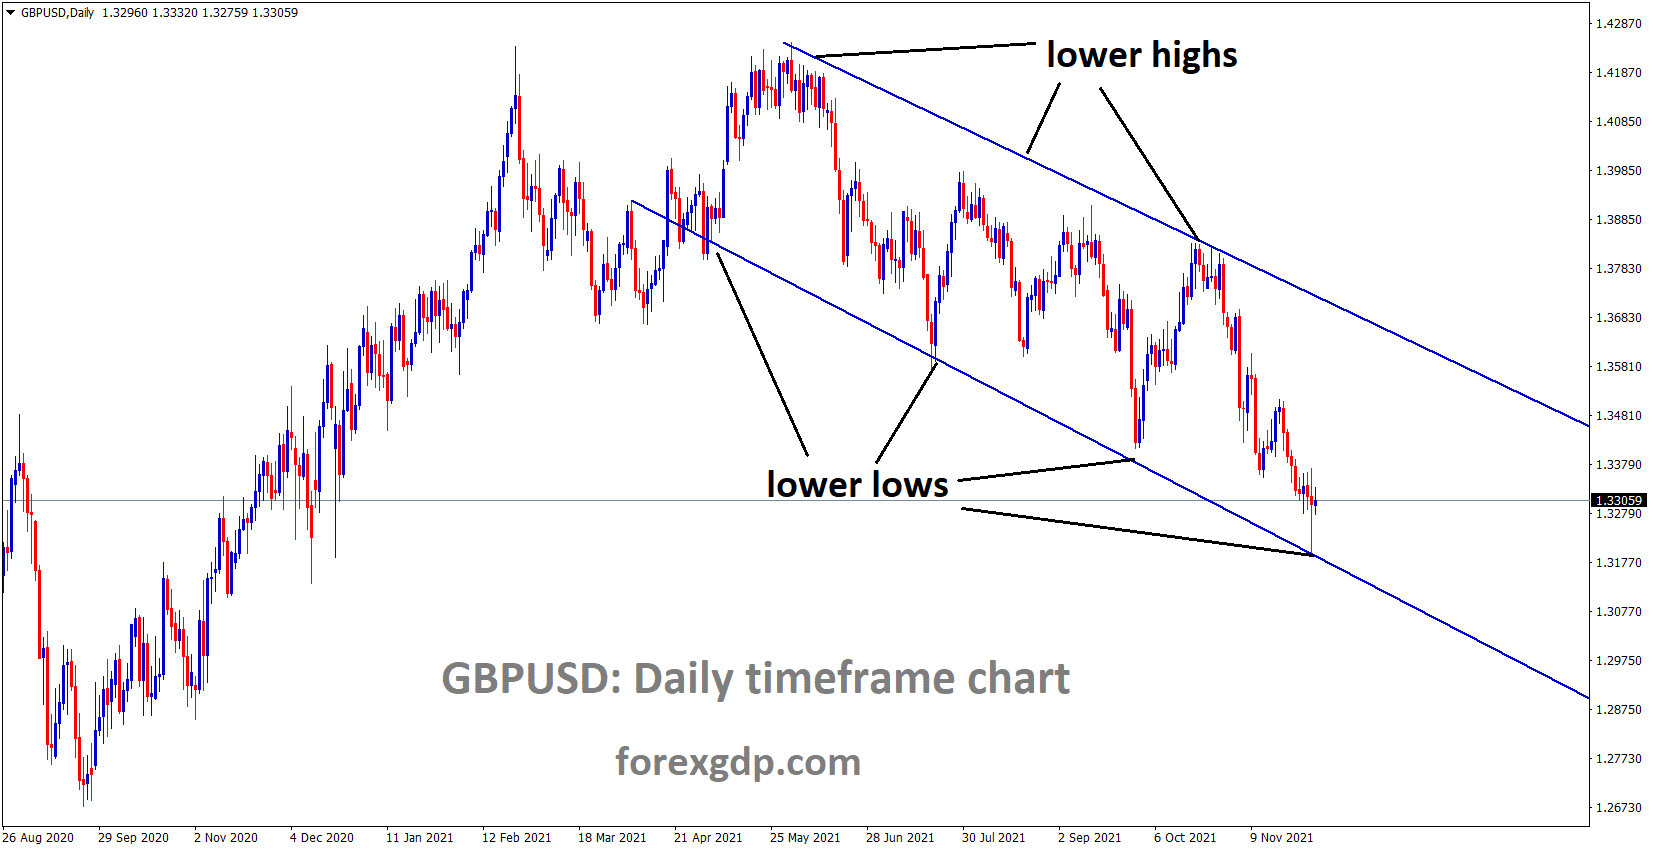 GBPUSD is moving in the Descending channel and the market has rebounded from the lower low area of the channel.